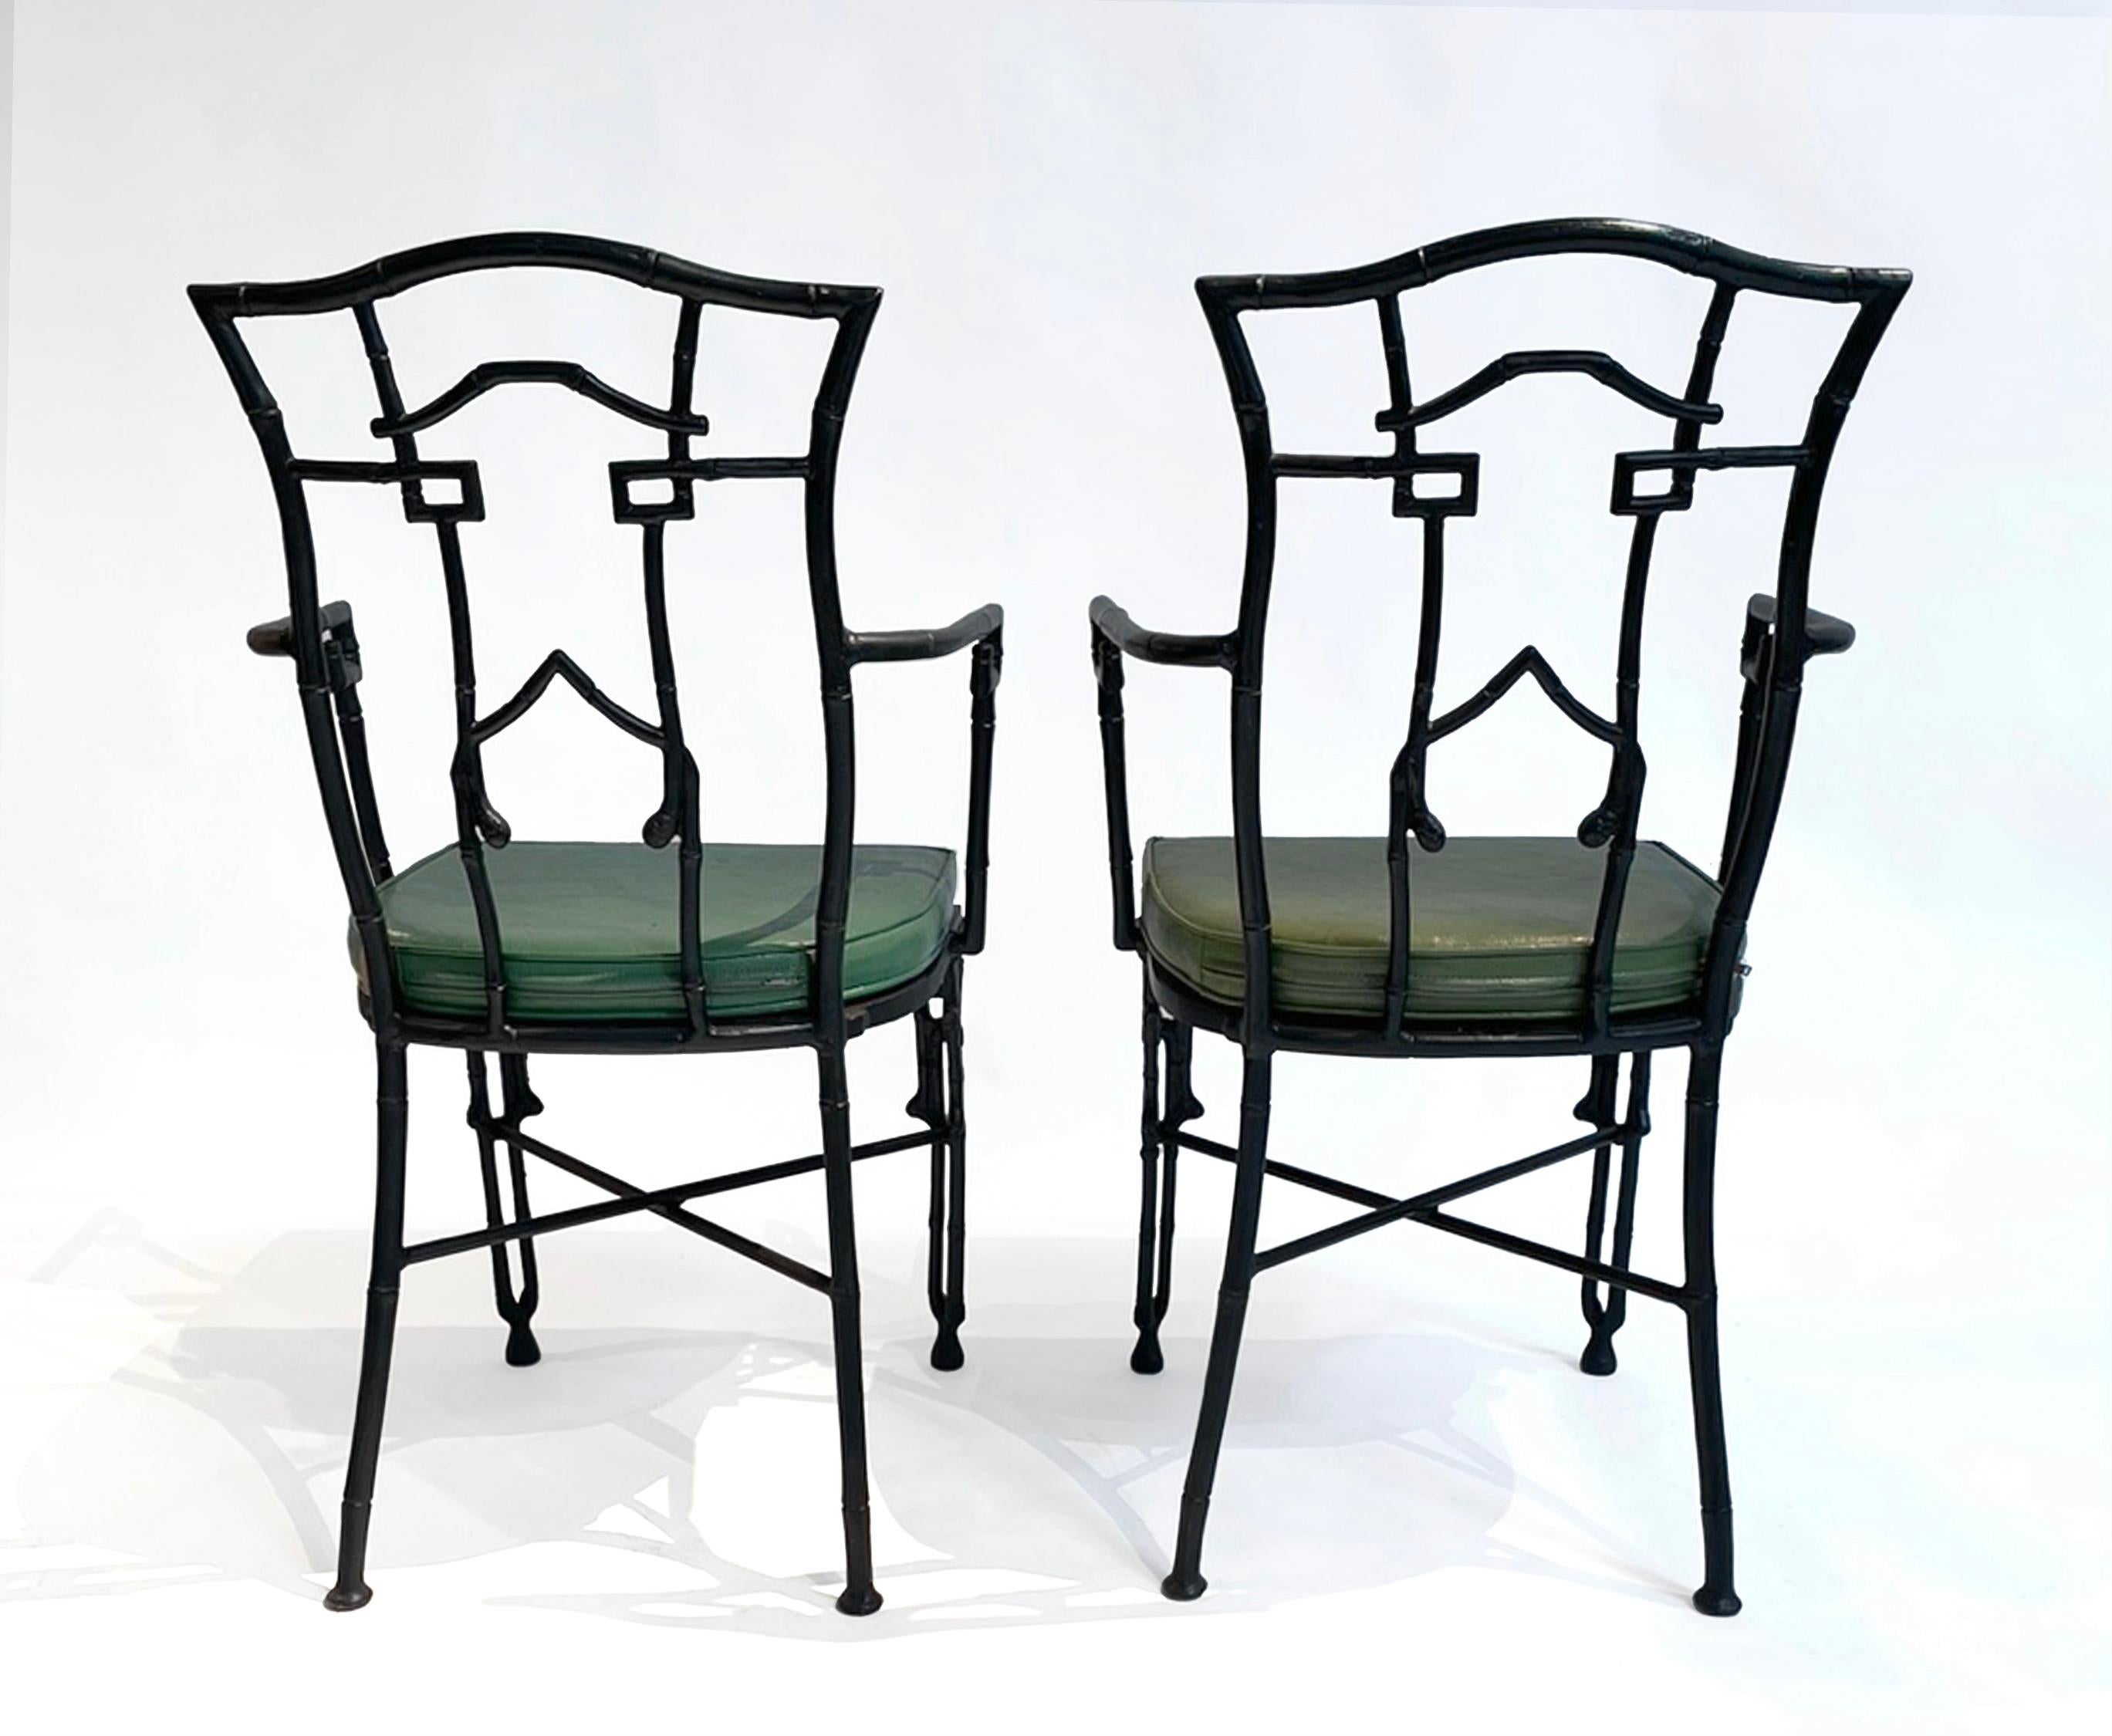 Pair of decorate wrought iron patio chairs. Green / blue cushions are removable. Cushion colors slightly differ. Heavy and sturdy. Ready for use.